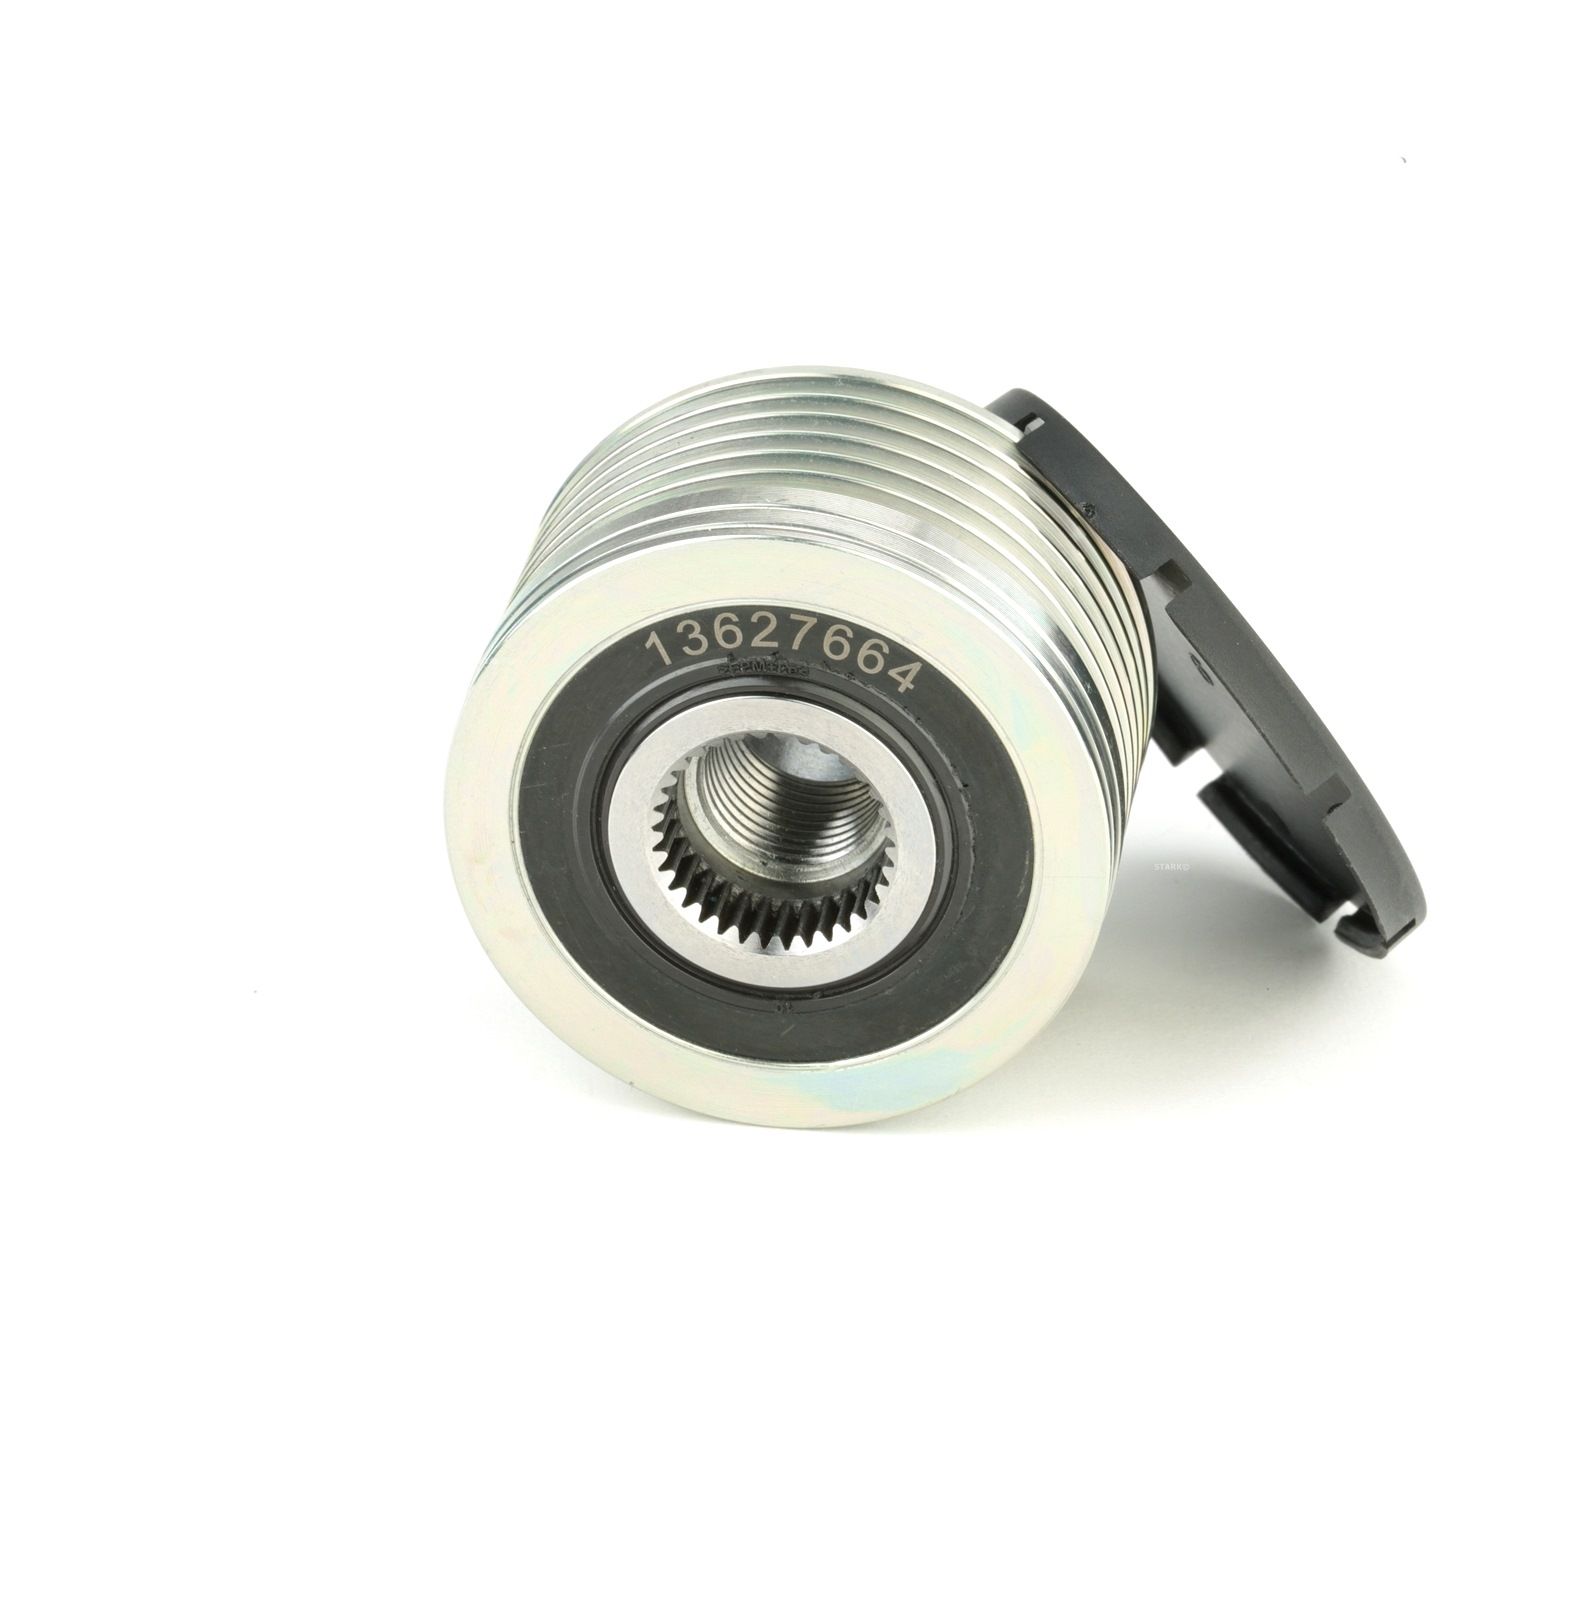 STARK SKFC-1210026 Alternator Freewheel Clutch Width: 33,2mm, Requires special tools for mounting